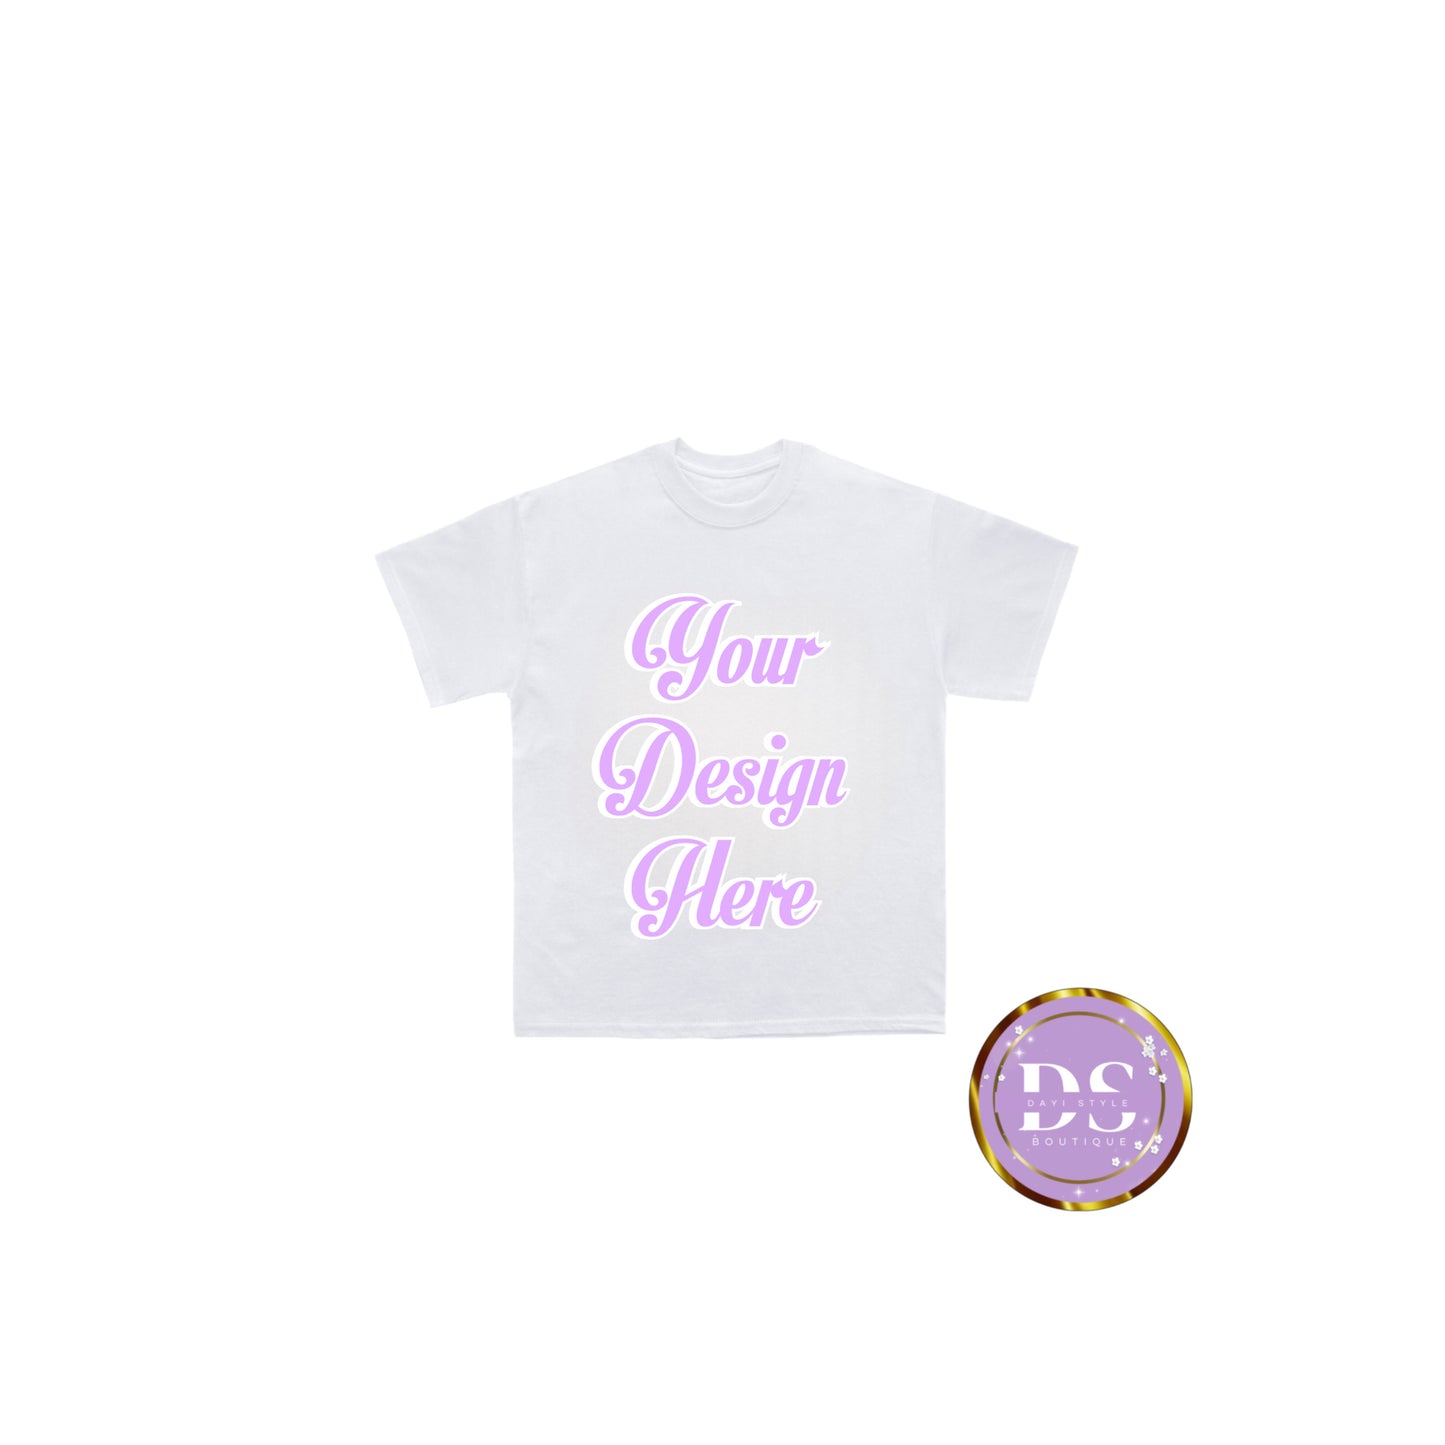 Toddler t-shirt to personalize